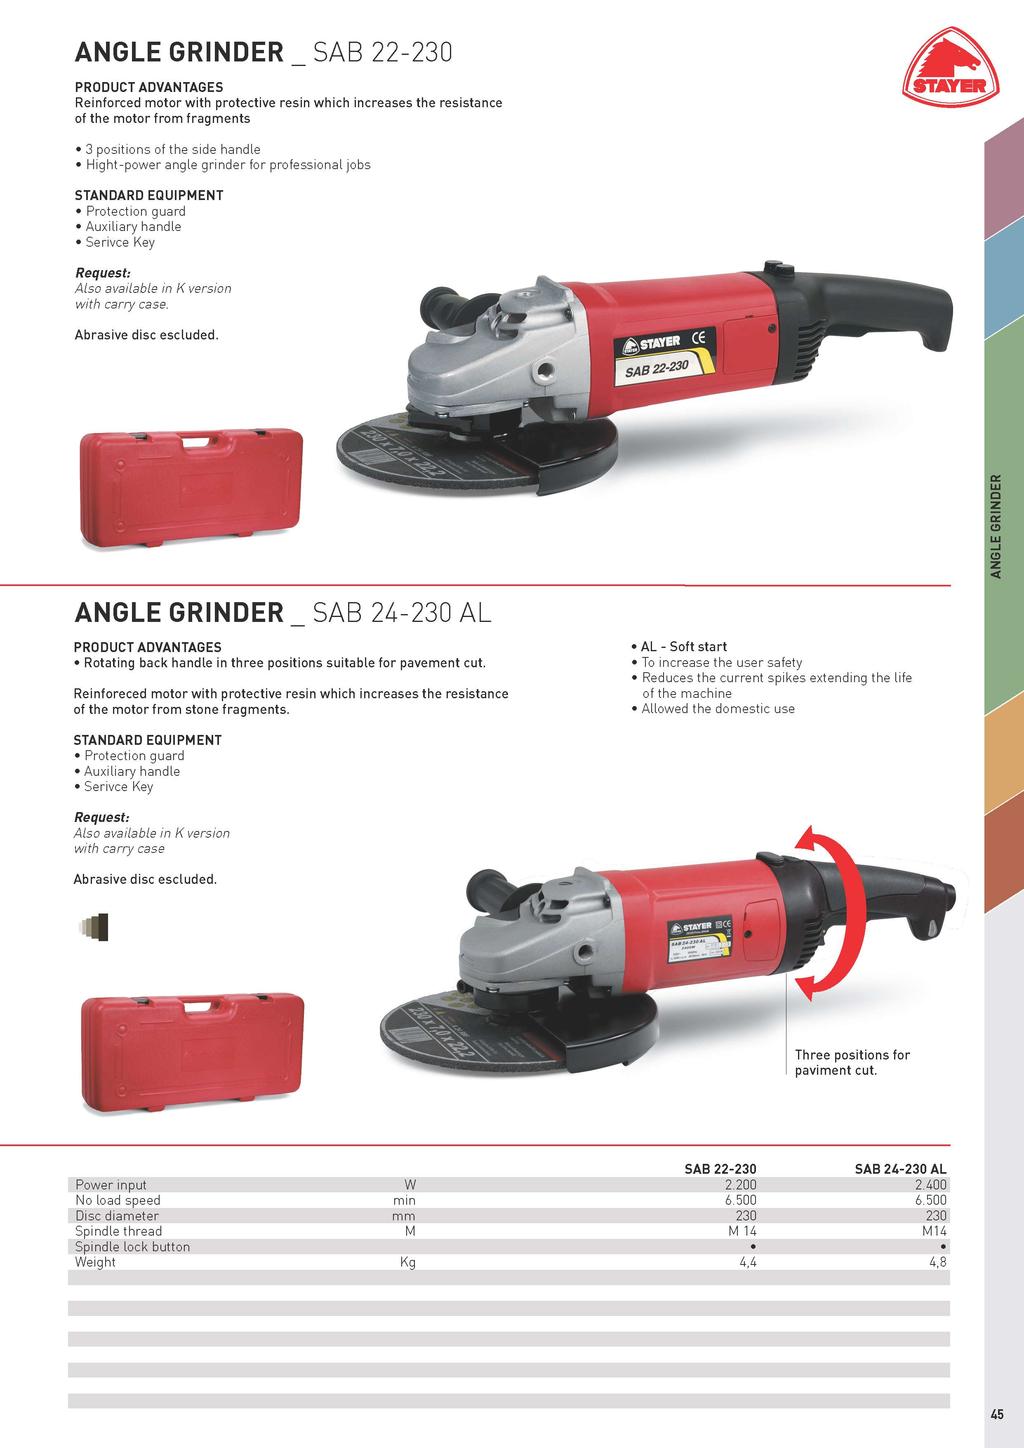 ANGLE GRINDER SAB 22-230 Reinforced motor with protective resin which increases the of the motor from fragments resistance Hight-power angle grinder for professional jobs STANDARD EQUIPMENT ANGLE